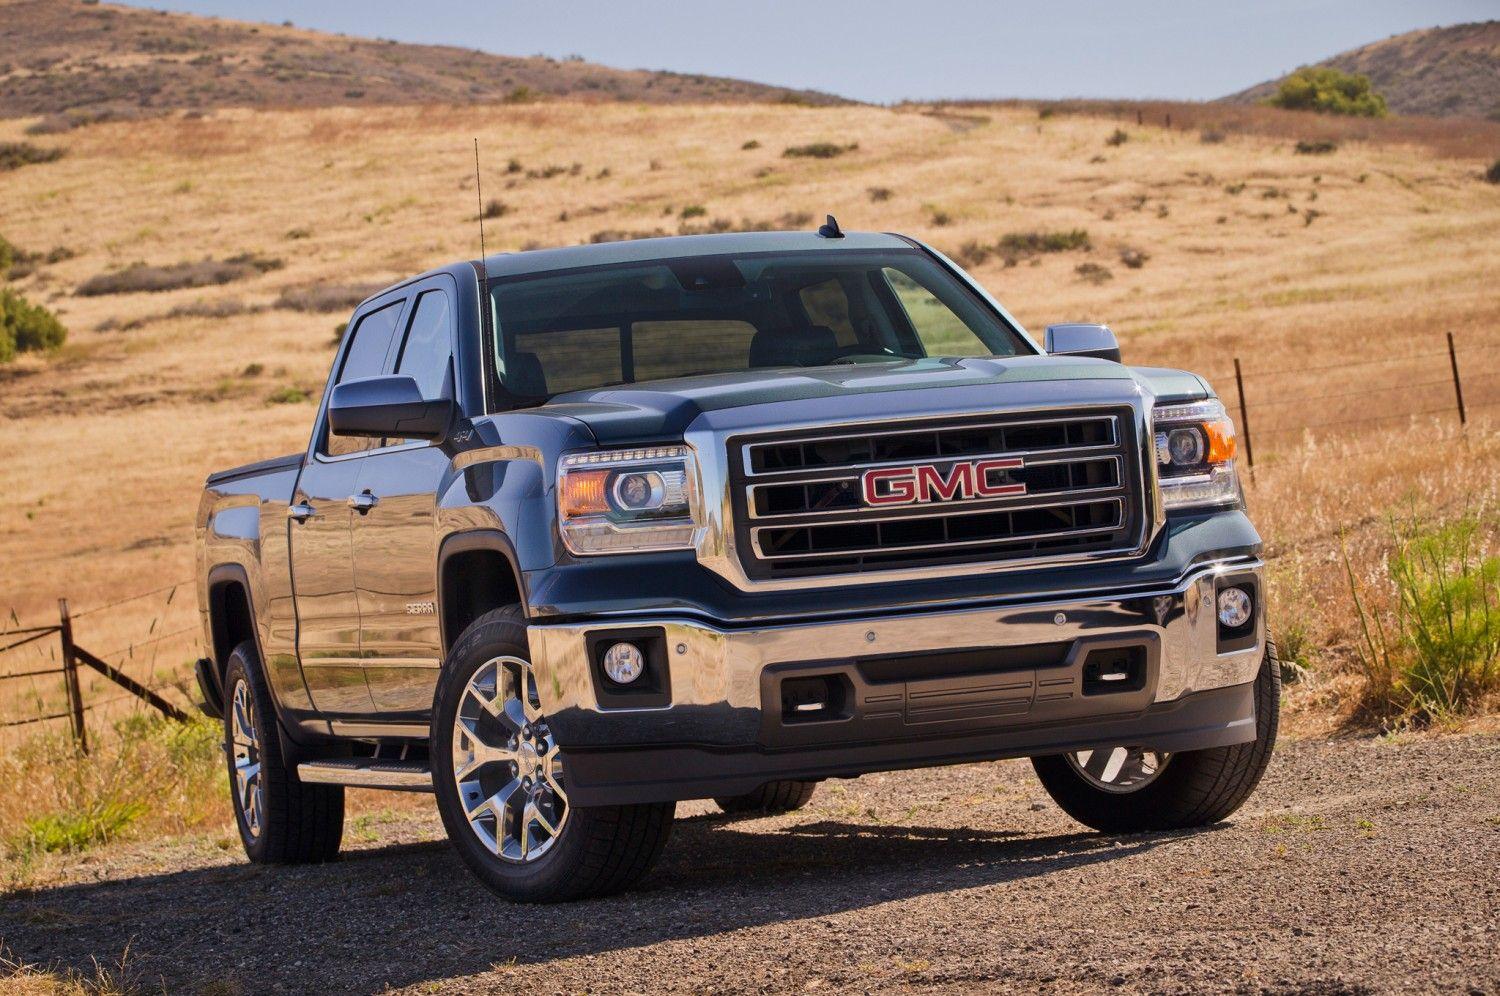 HD GMC Wallpapers and Photos